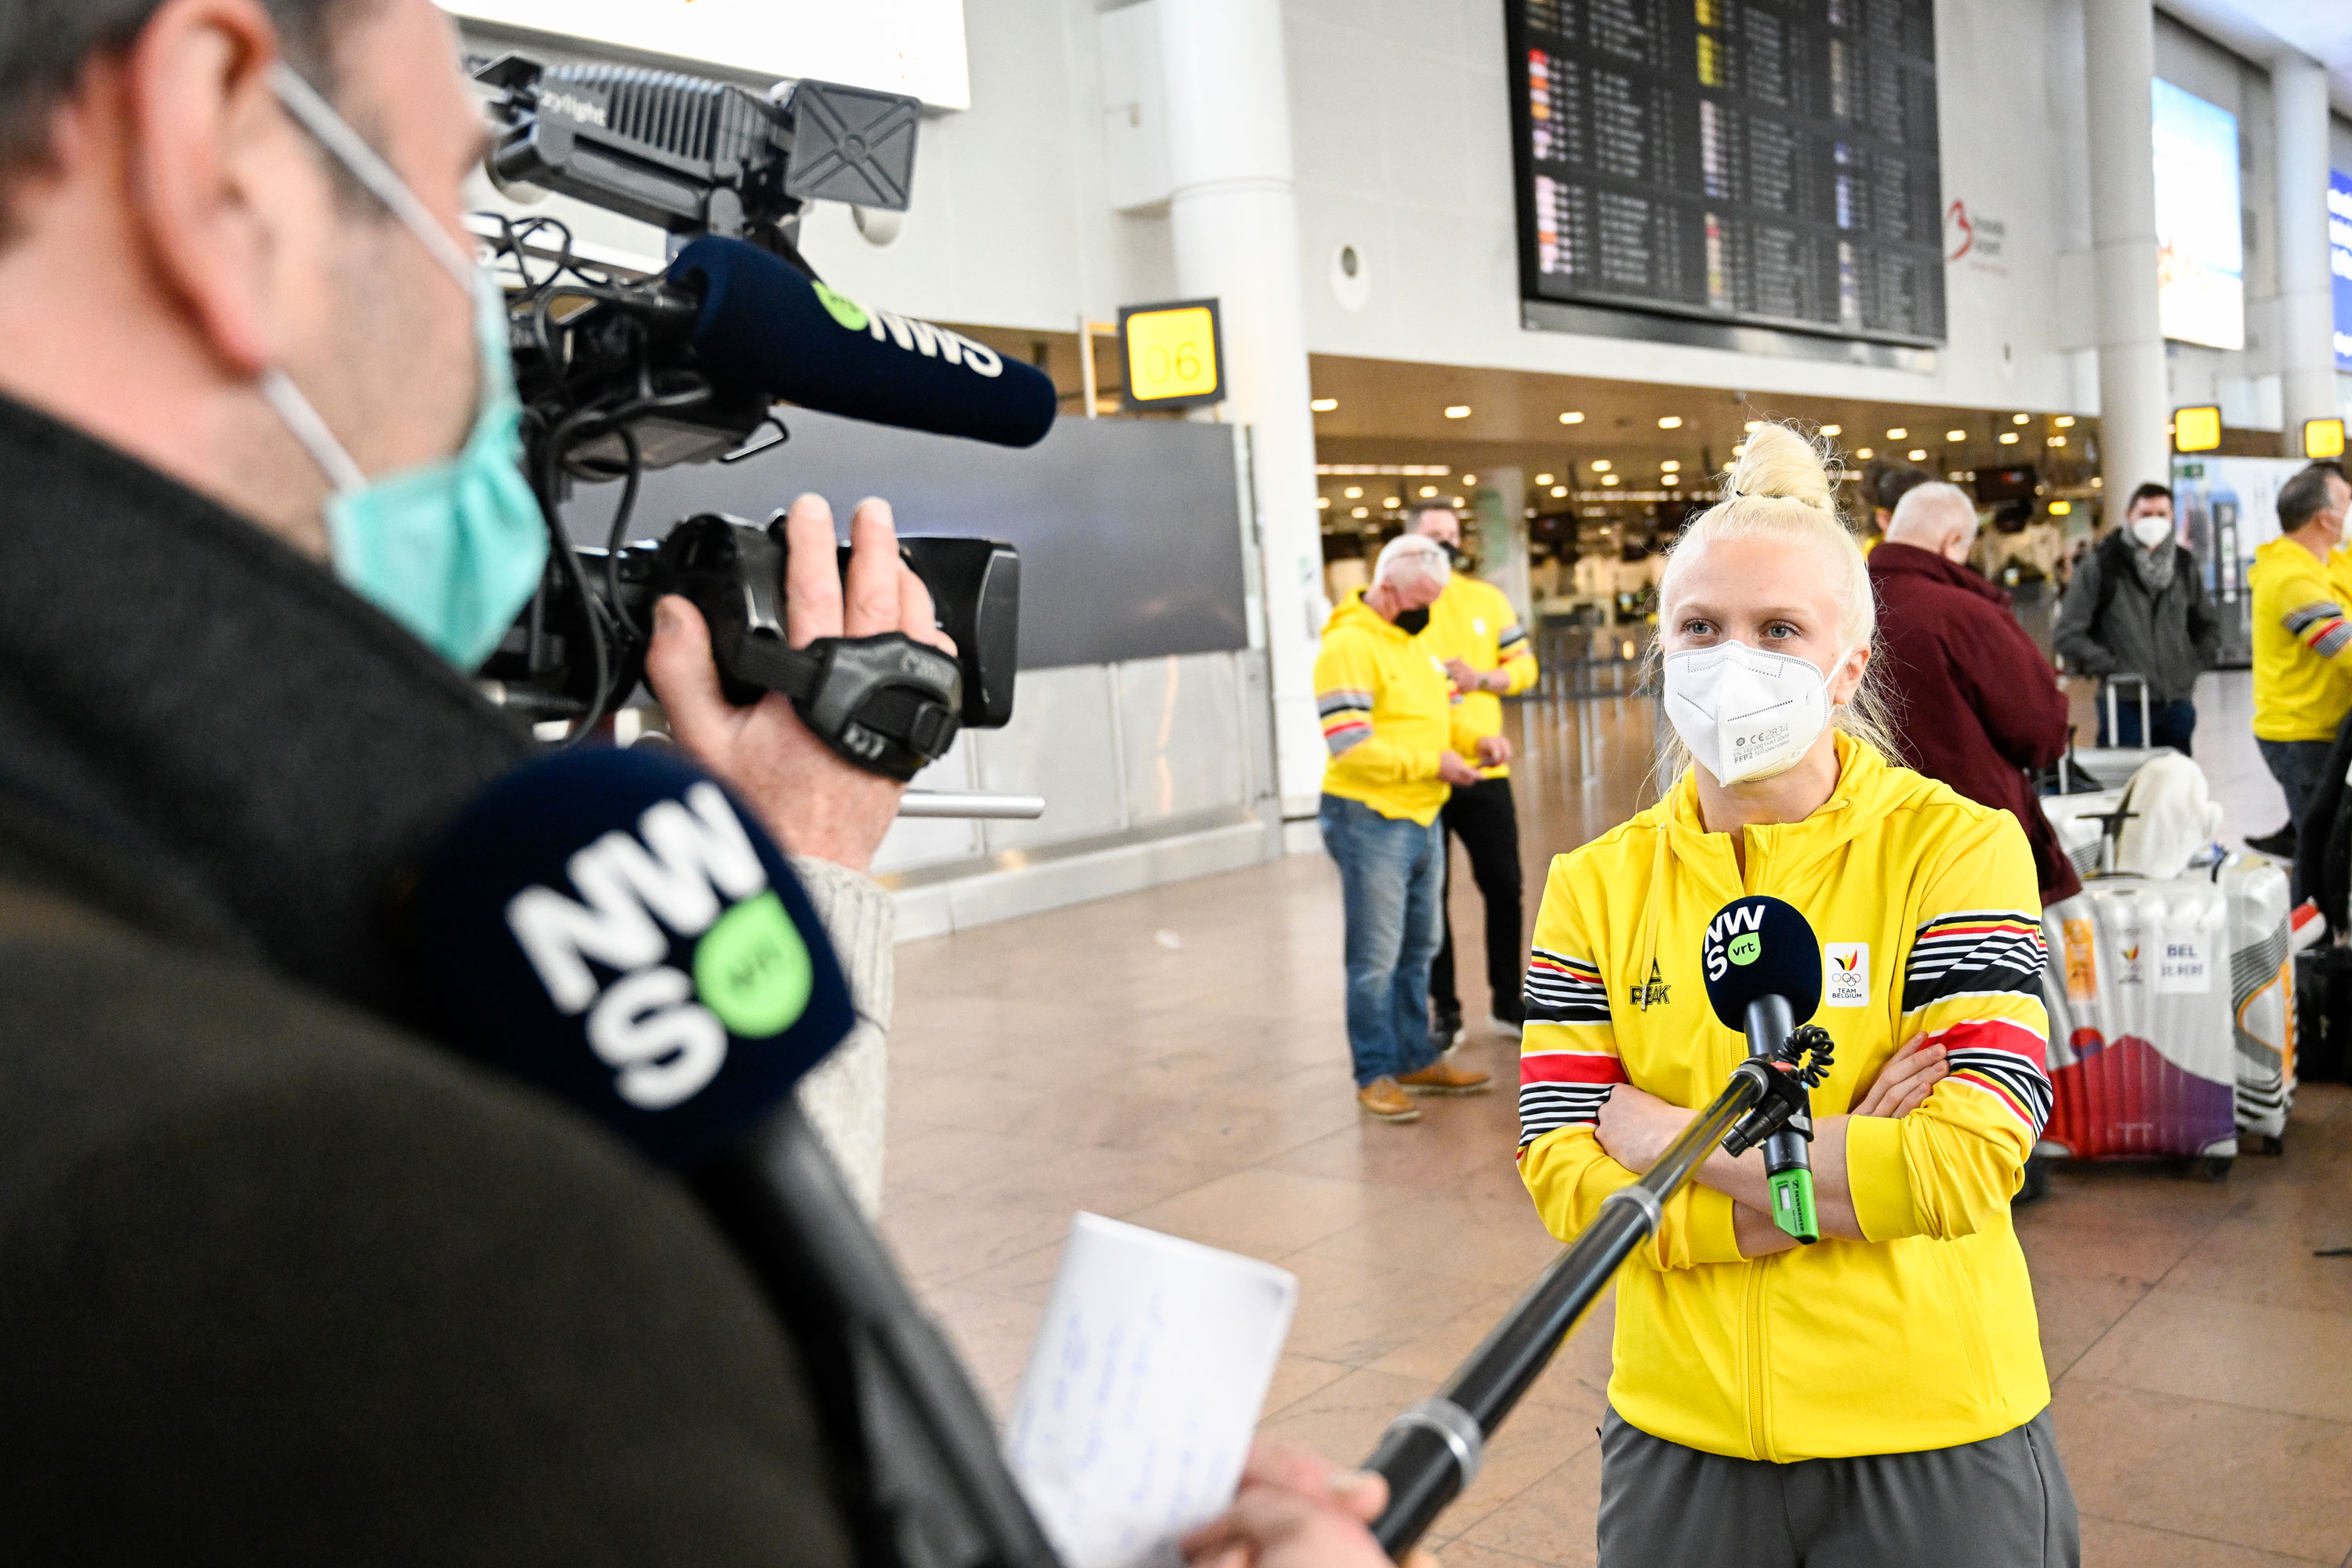 Kim Meylemans speaks to press at the Brussels Airport in Zaventem, Brussels, before leaving for Beijing on January 29.